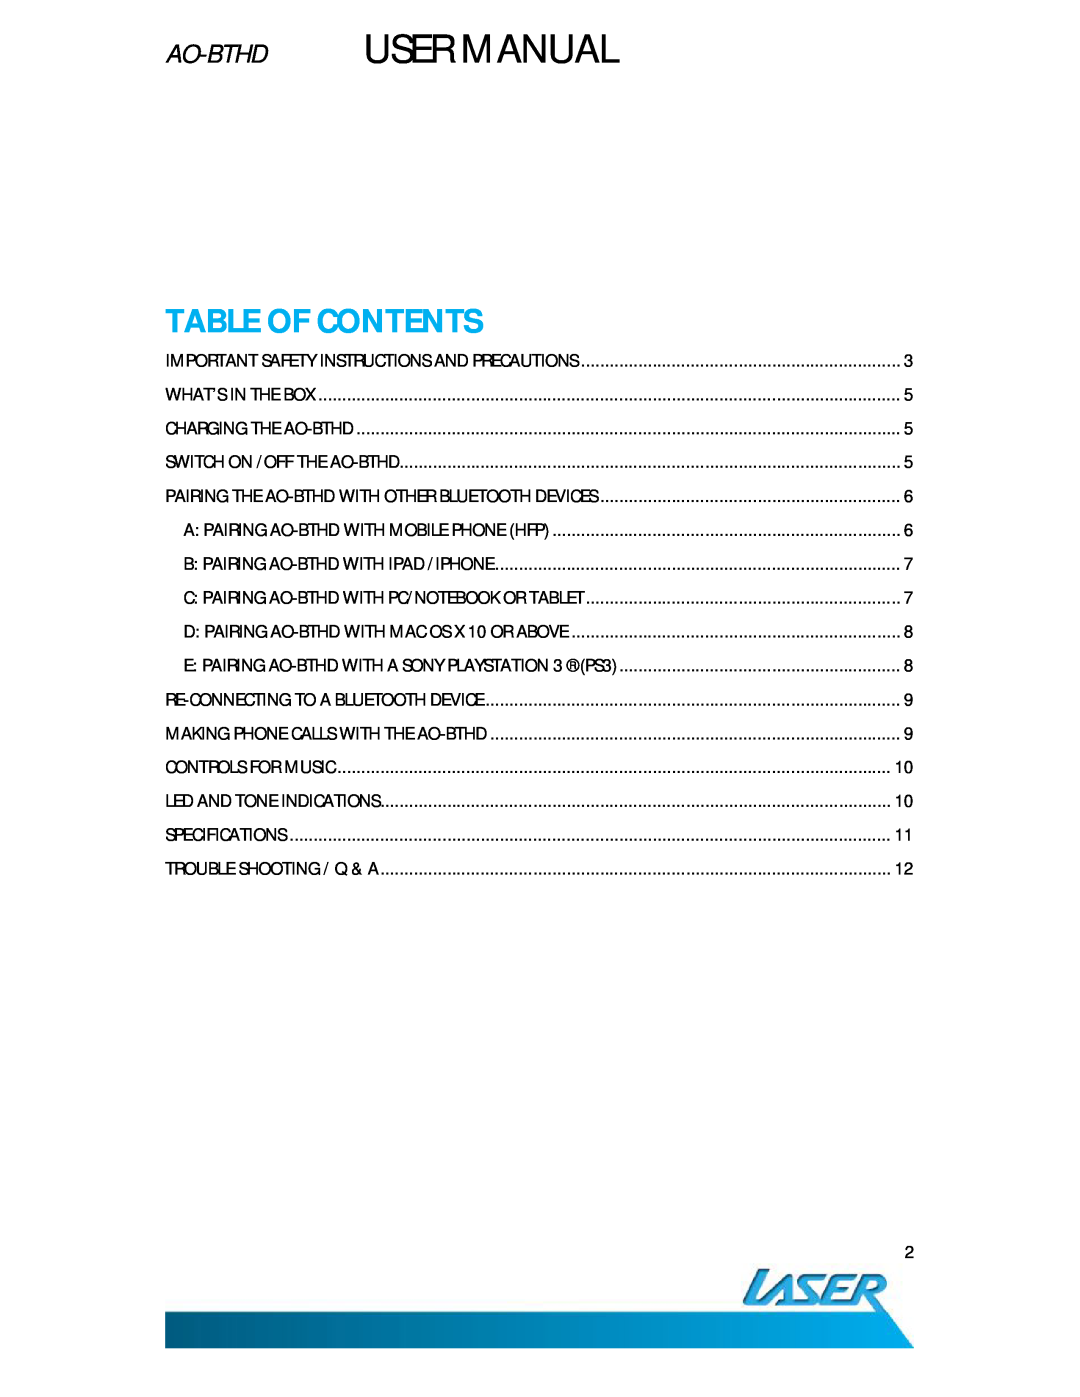 Laser AO-BTHD user manual Table Of Contents 